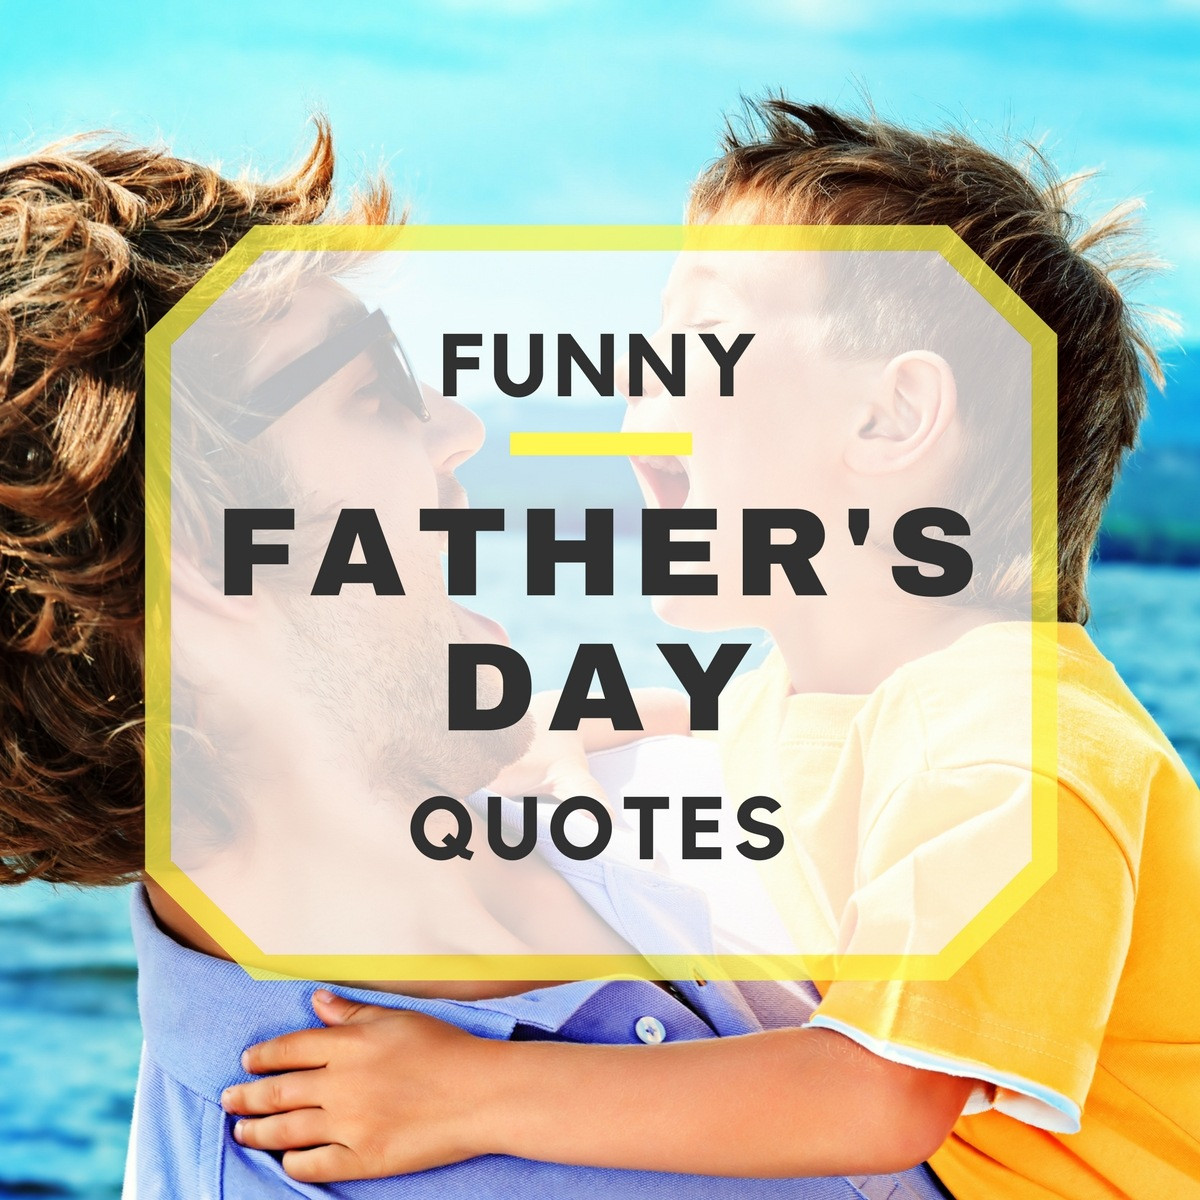 Funny Fathers Day Quotes
 20 Funny Father s Day Quotes